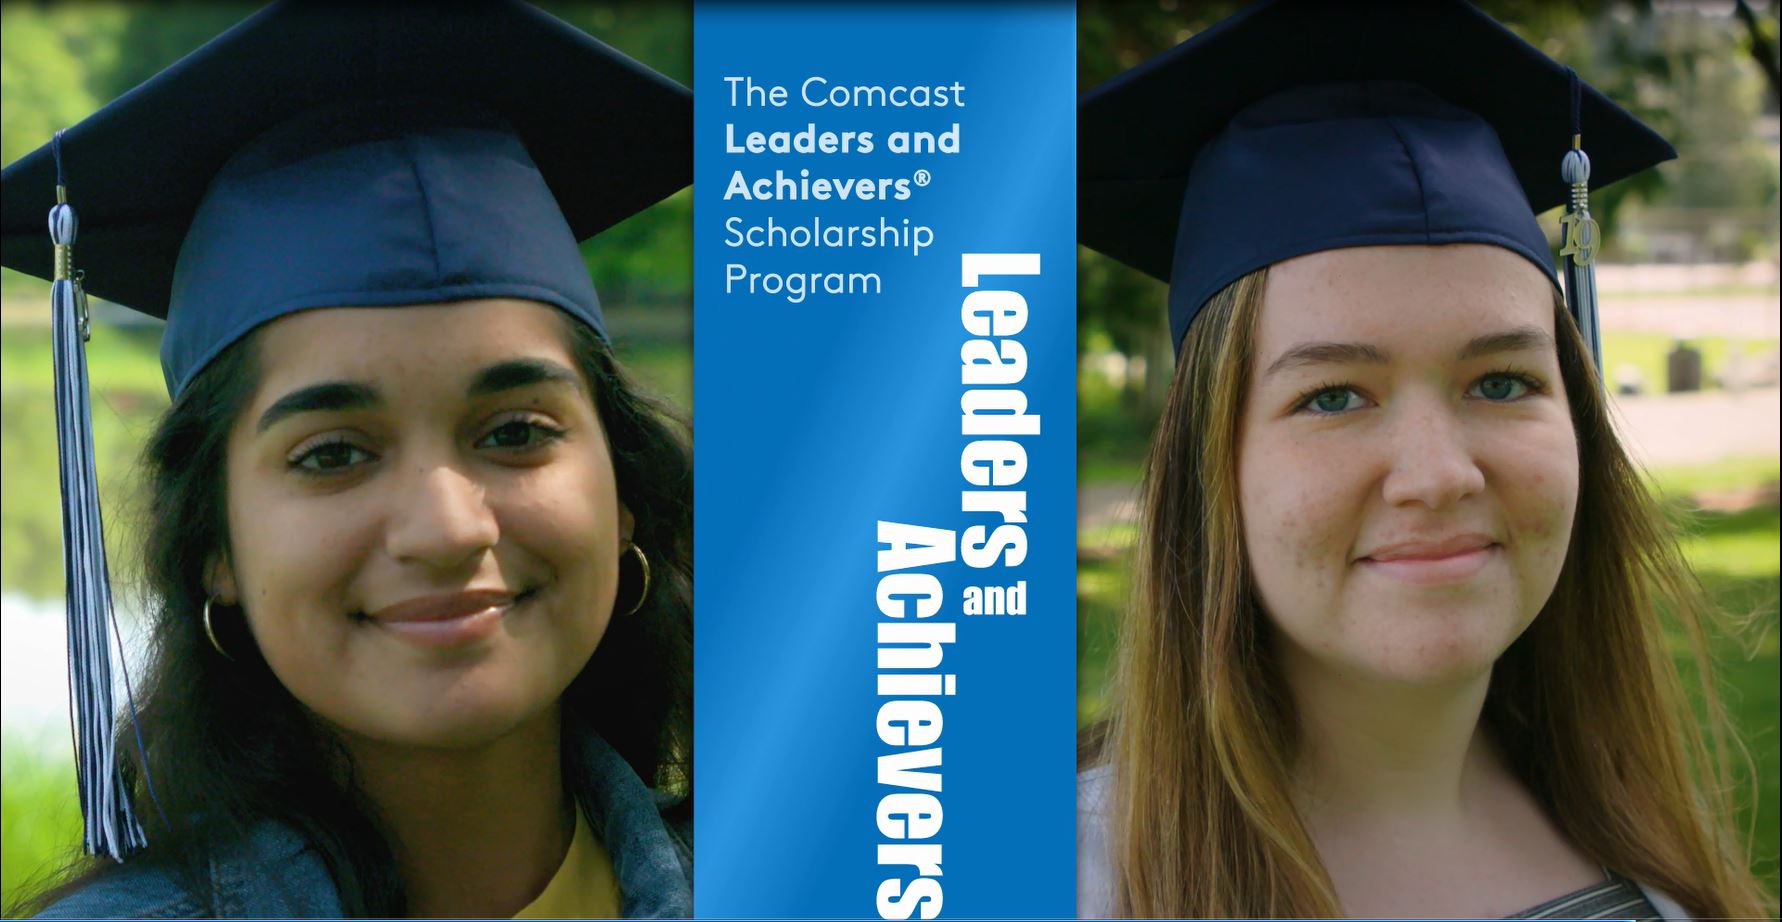 Comcast Leaders and Achievers Washington state scholarship winners 2019